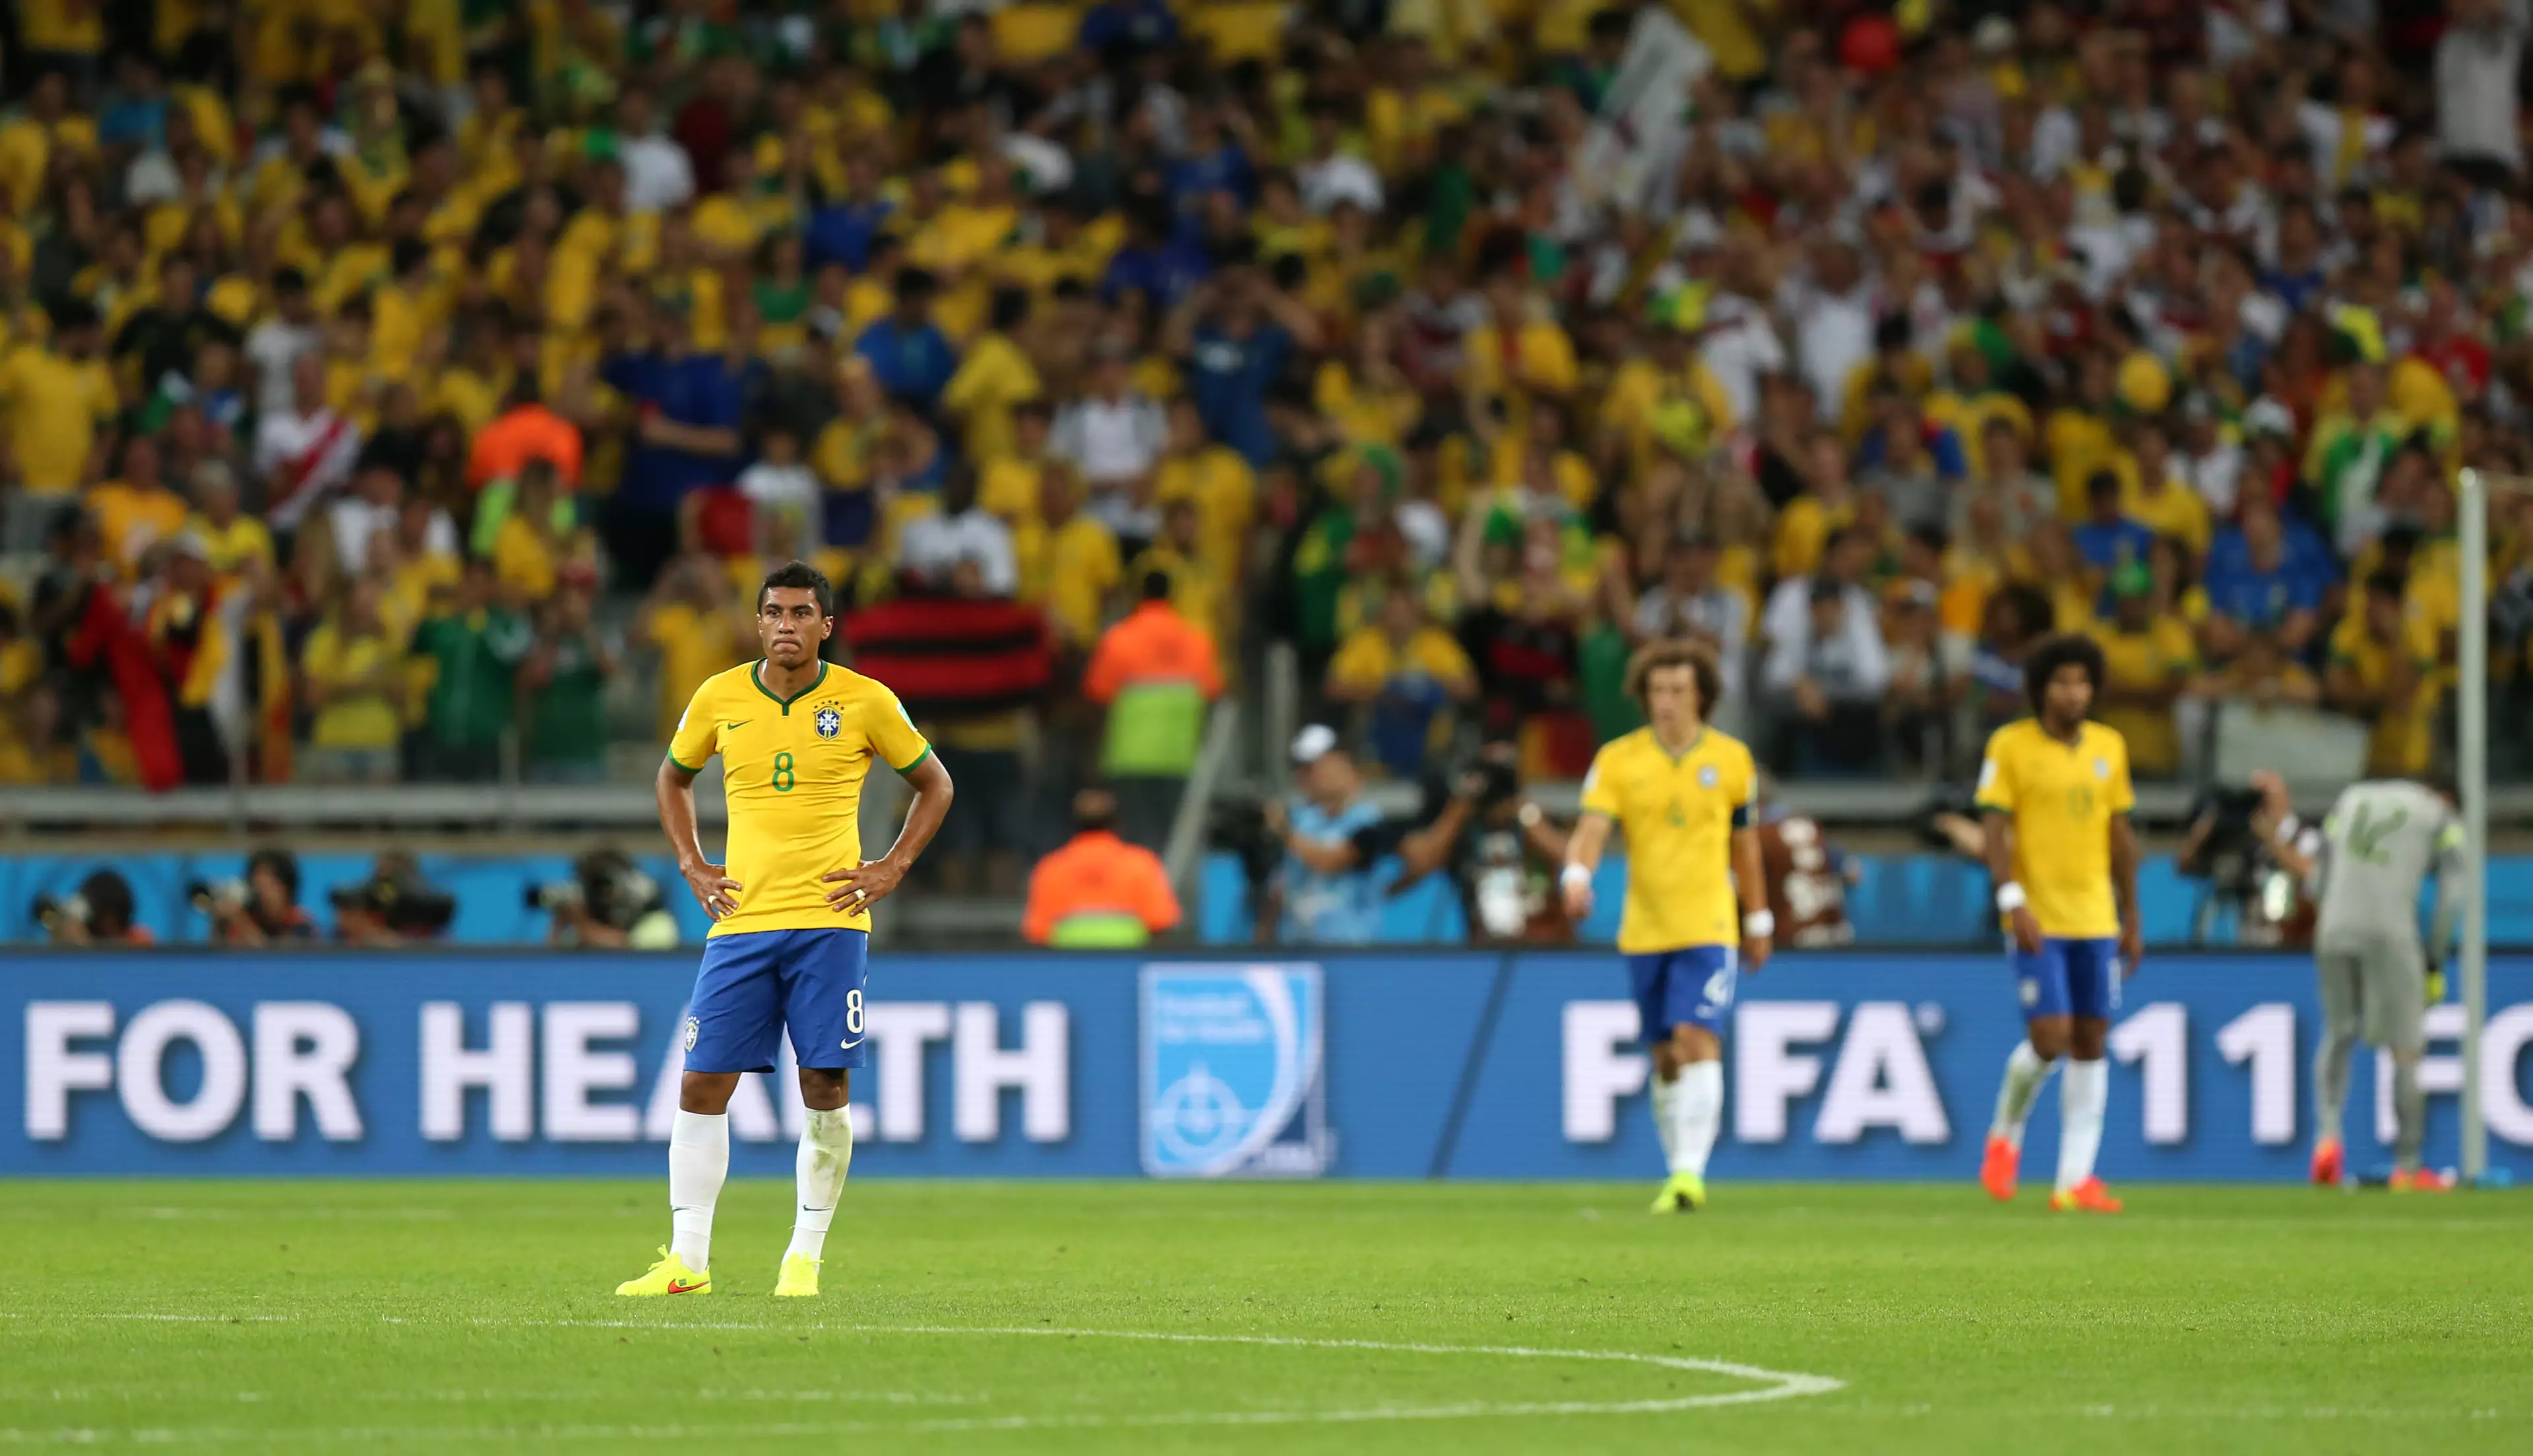 Brazil players couldn't work out what was going on. Image: PA Images